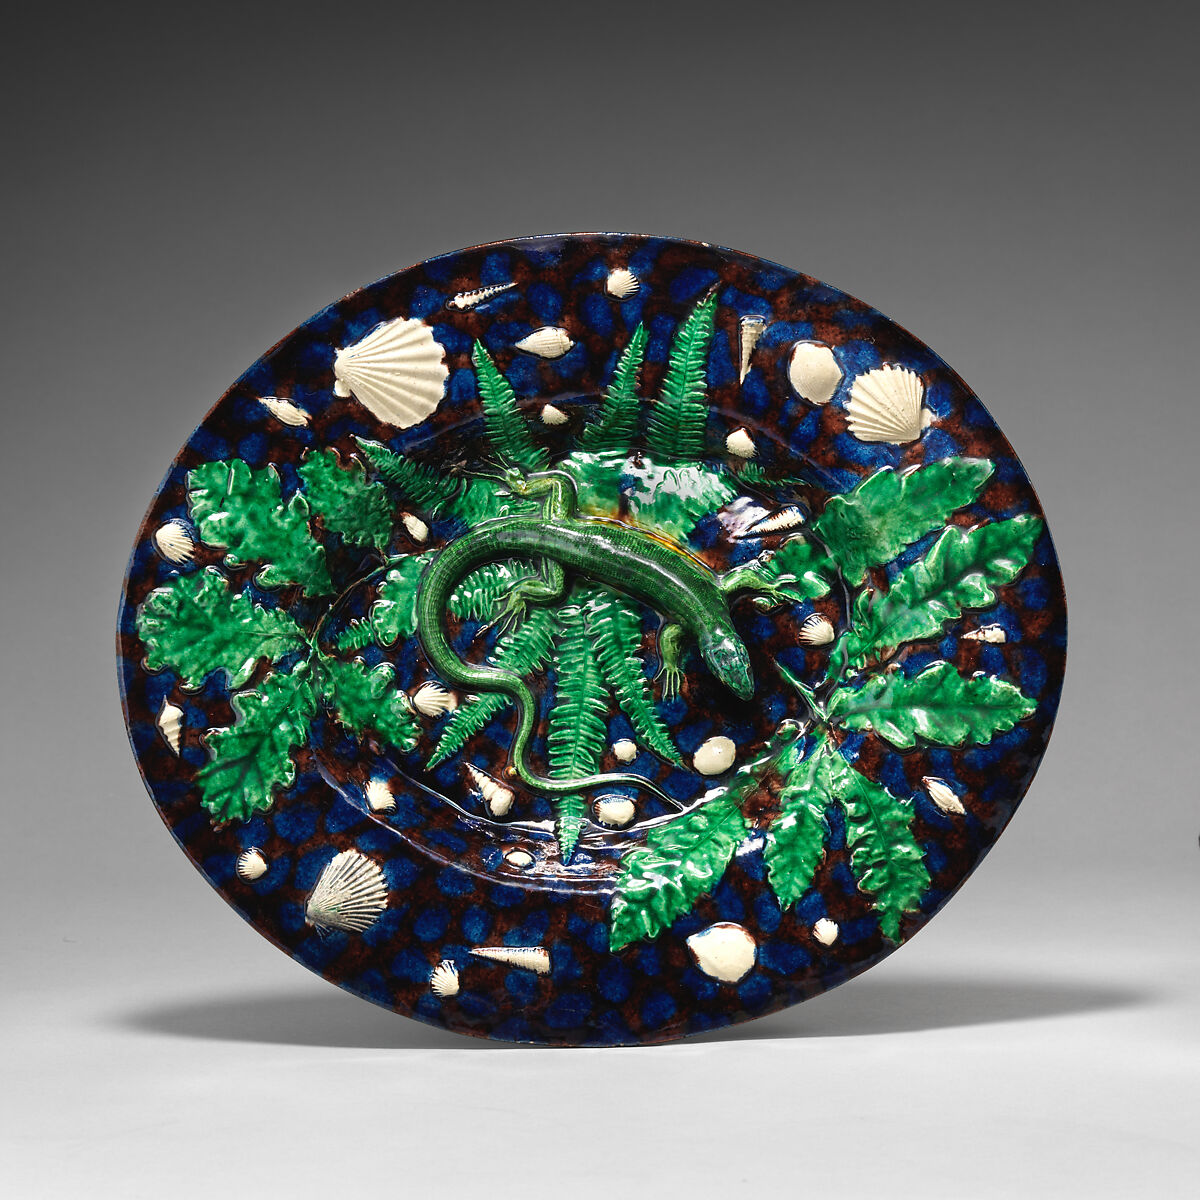 Small plate with lizard, shells, and blue and purple background, Georges Pull (Wissembourg, Alsace-Lorraine, France 1810–1889 Paris, France), Glazed earthenware, French, Paris 